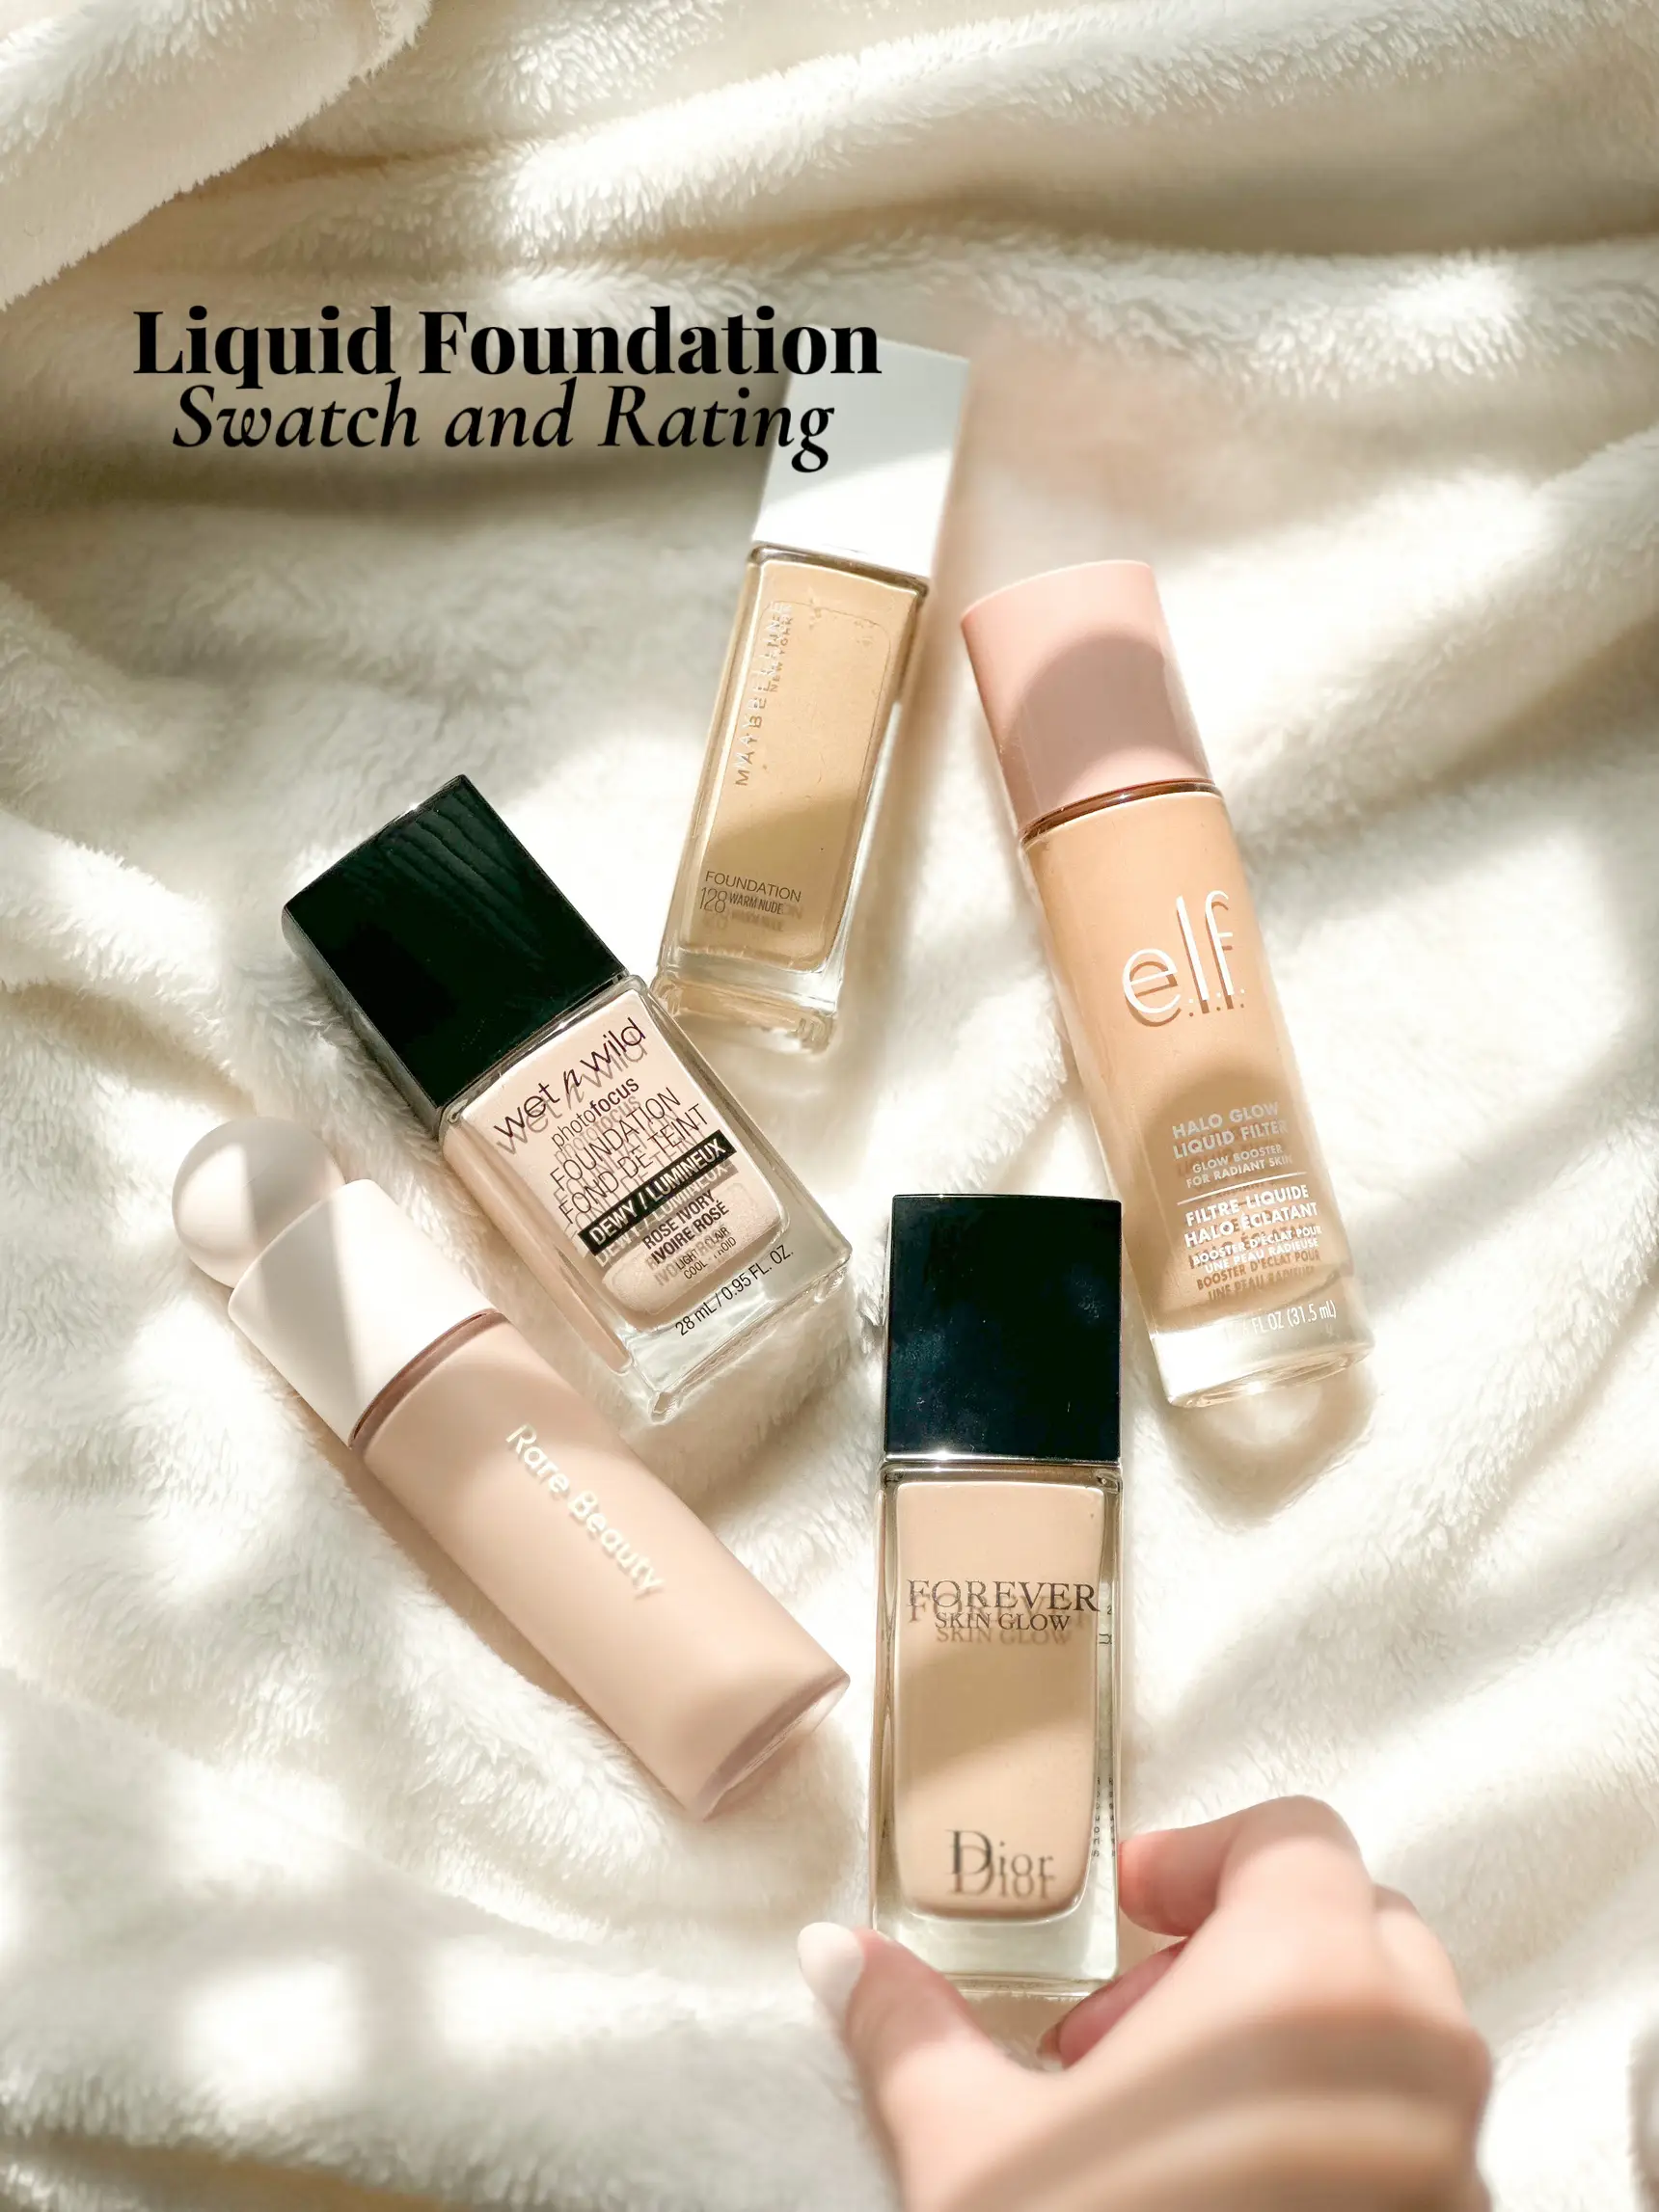 Rare beauty liquid touch foundation is lit 🔥